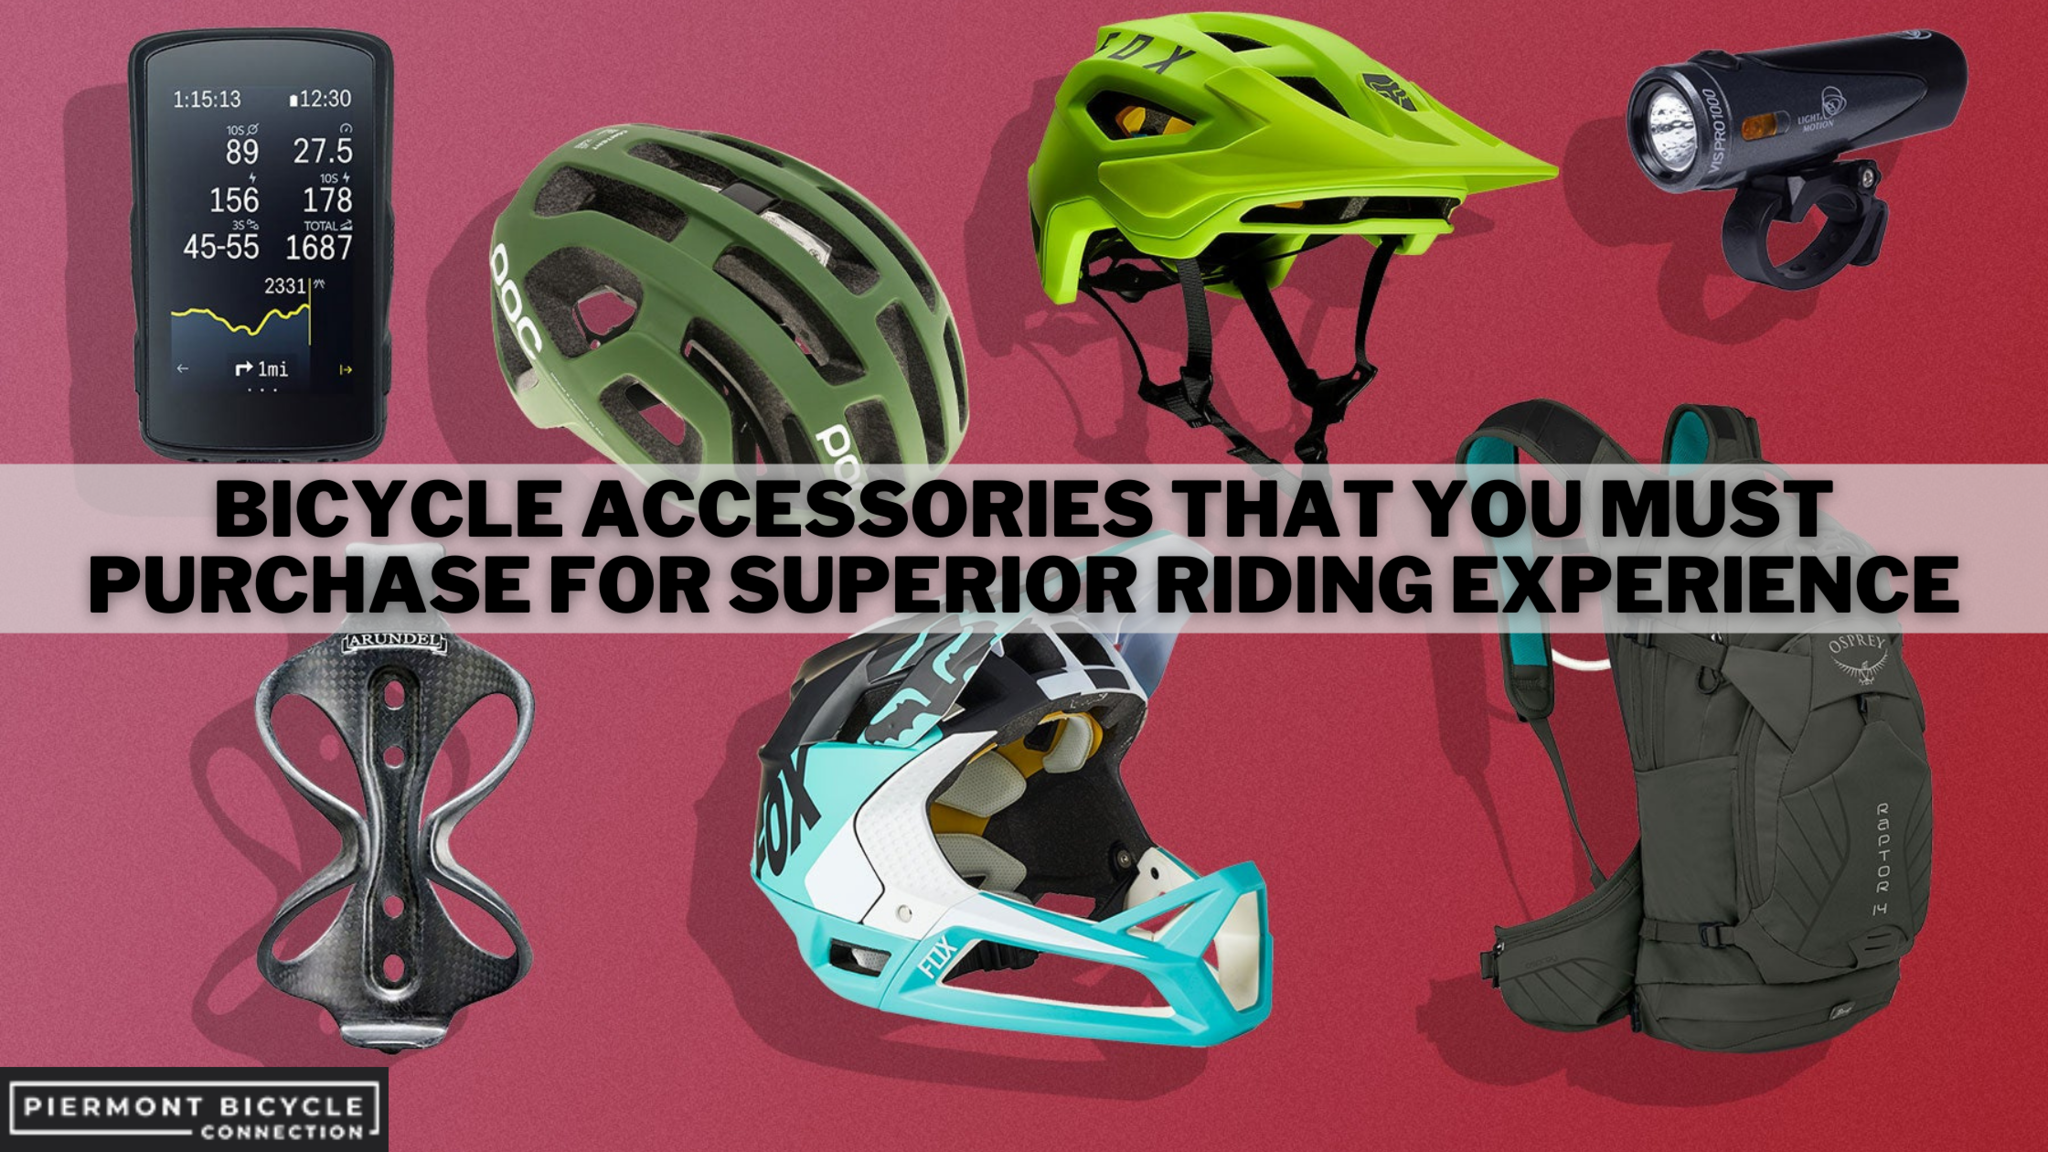 Bicycle Accessories That You Must Purchase for Superior Riding Experience